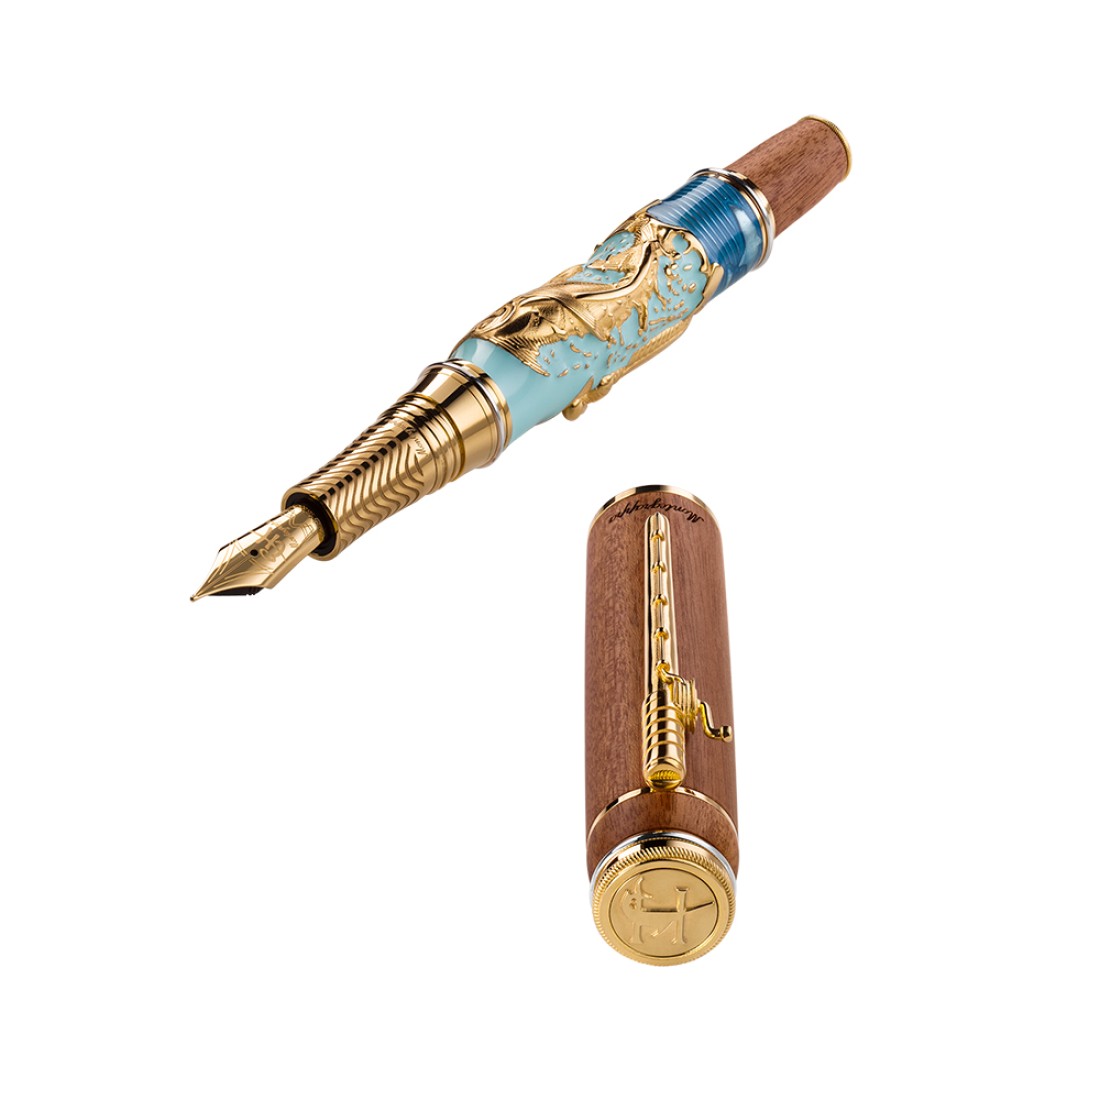 Montegrappa Hemingway The Old Man and the Sea Gold Fountain pen